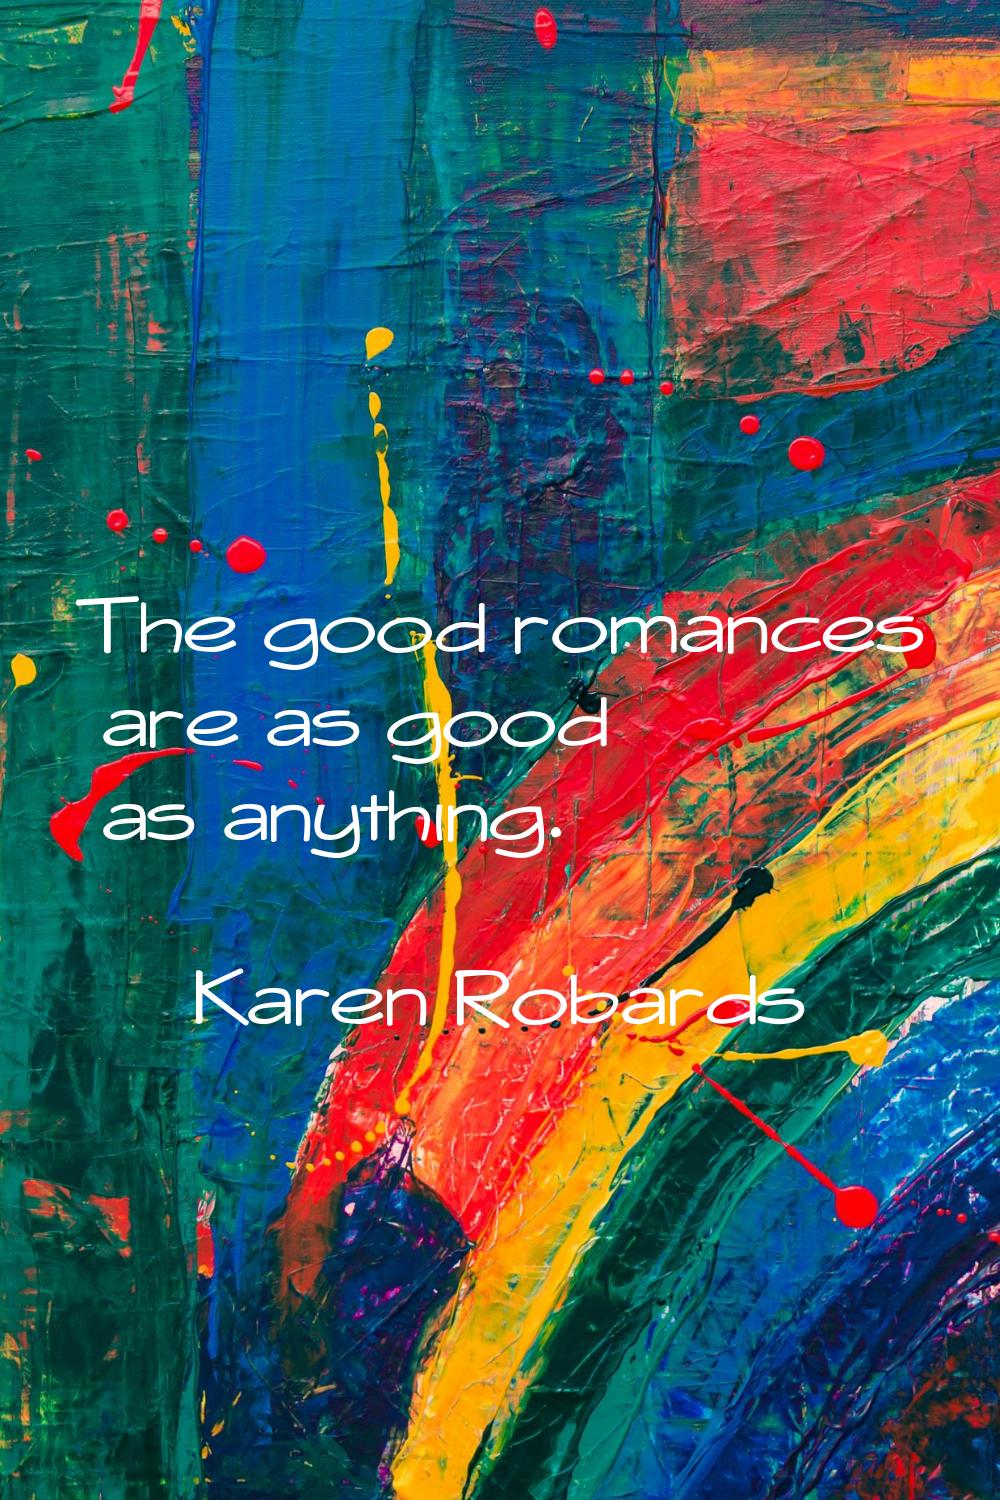 The good romances are as good as anything.